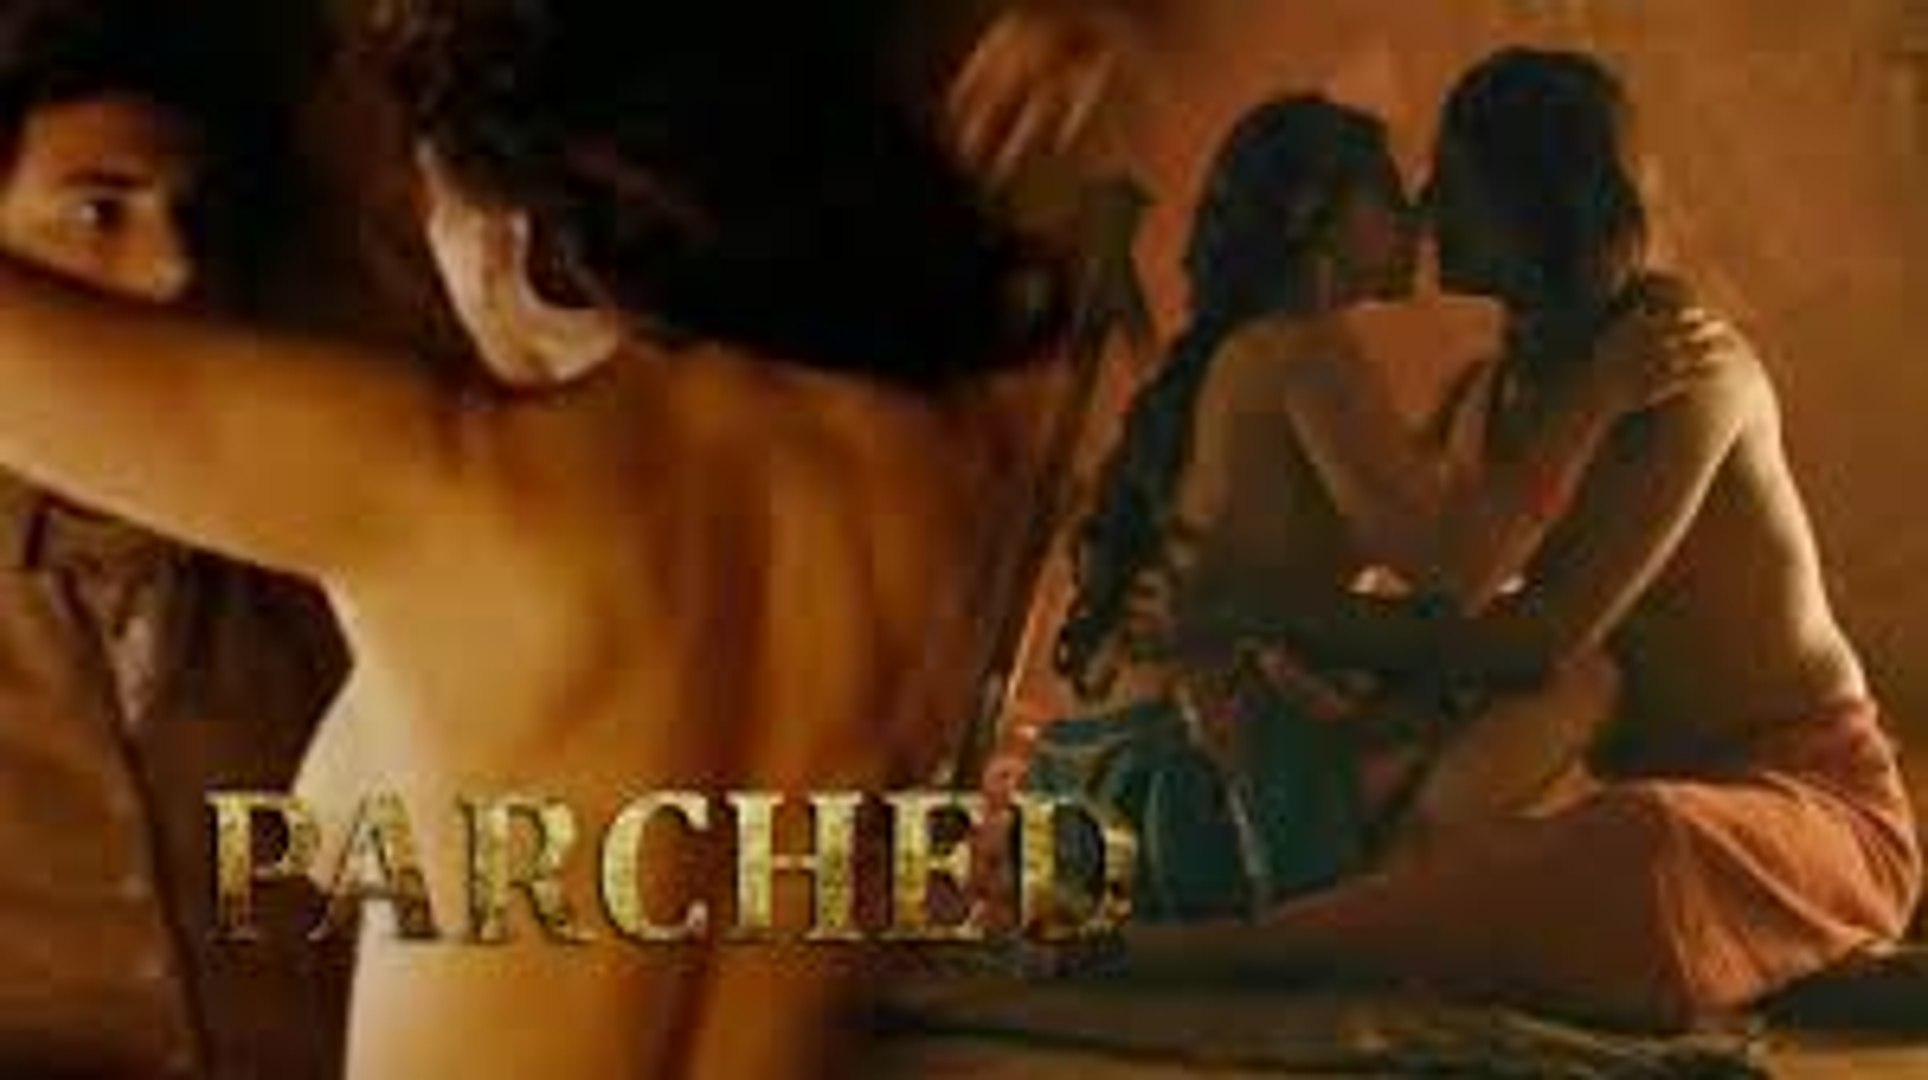 Daku Sex Move - Parched - UNRATED - Dvd Part-1 - video dailymotion